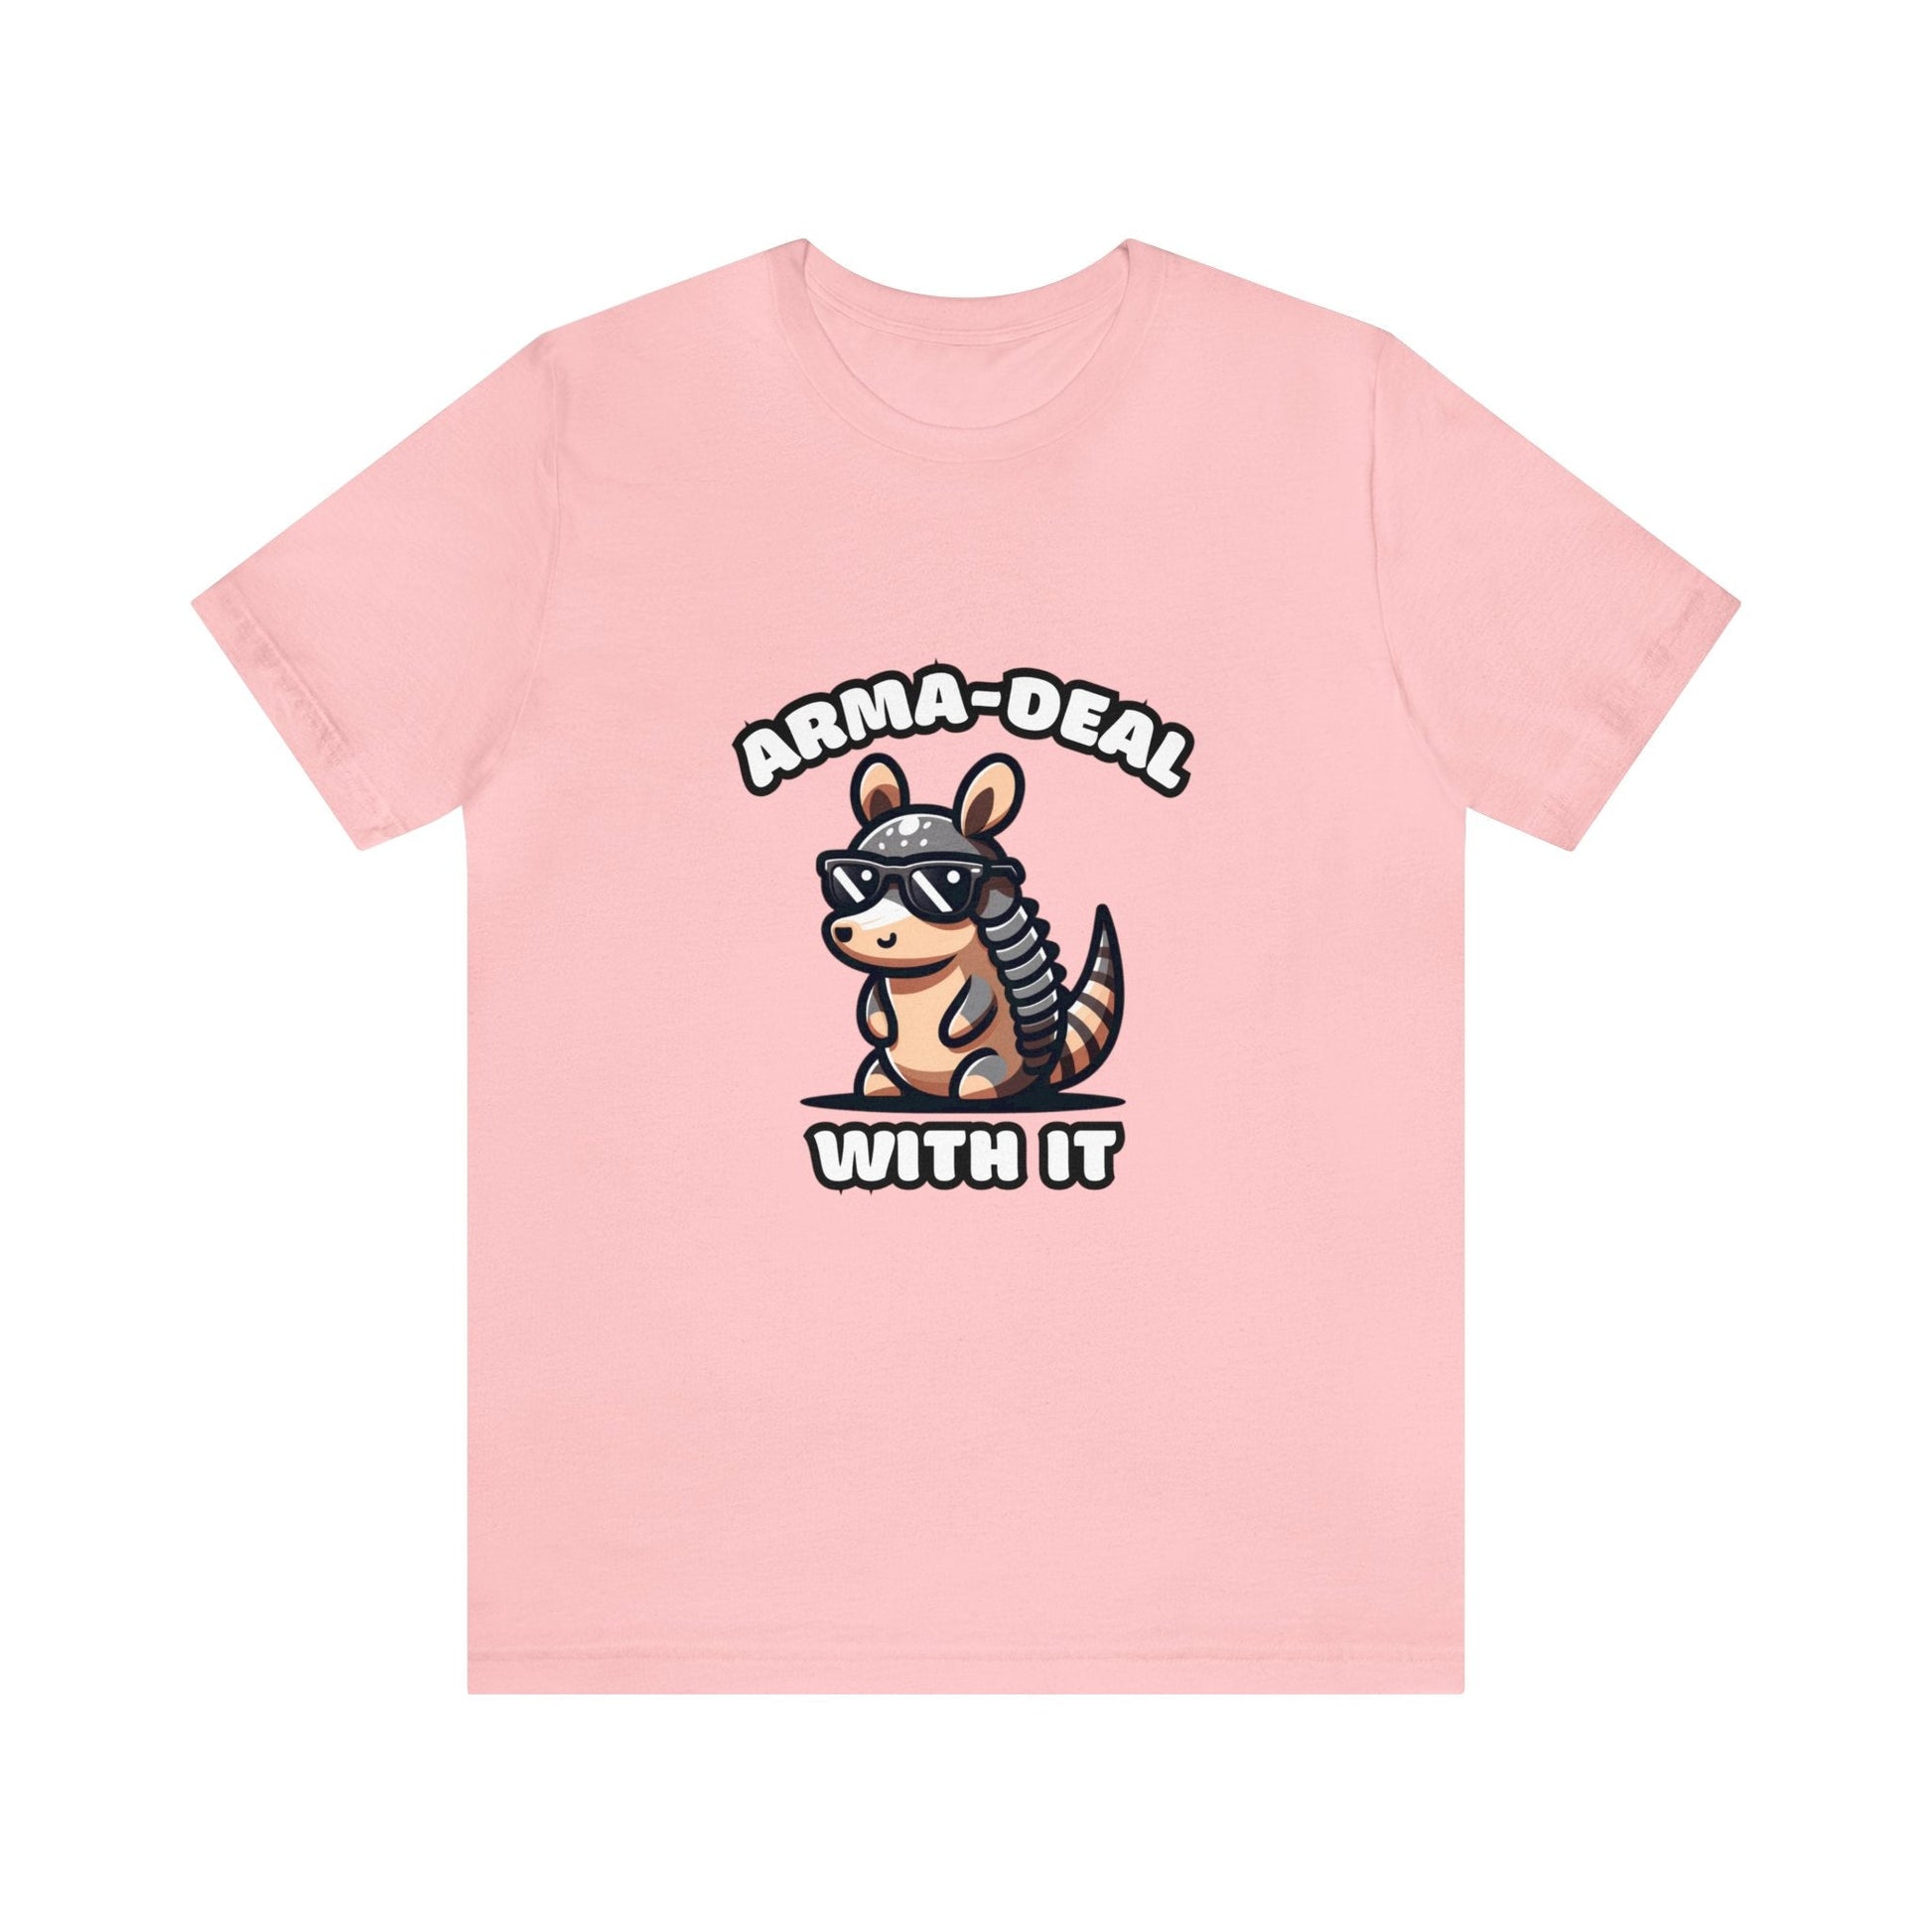 Arma-Deal With It - Armadillo T-shirt Pink / XS